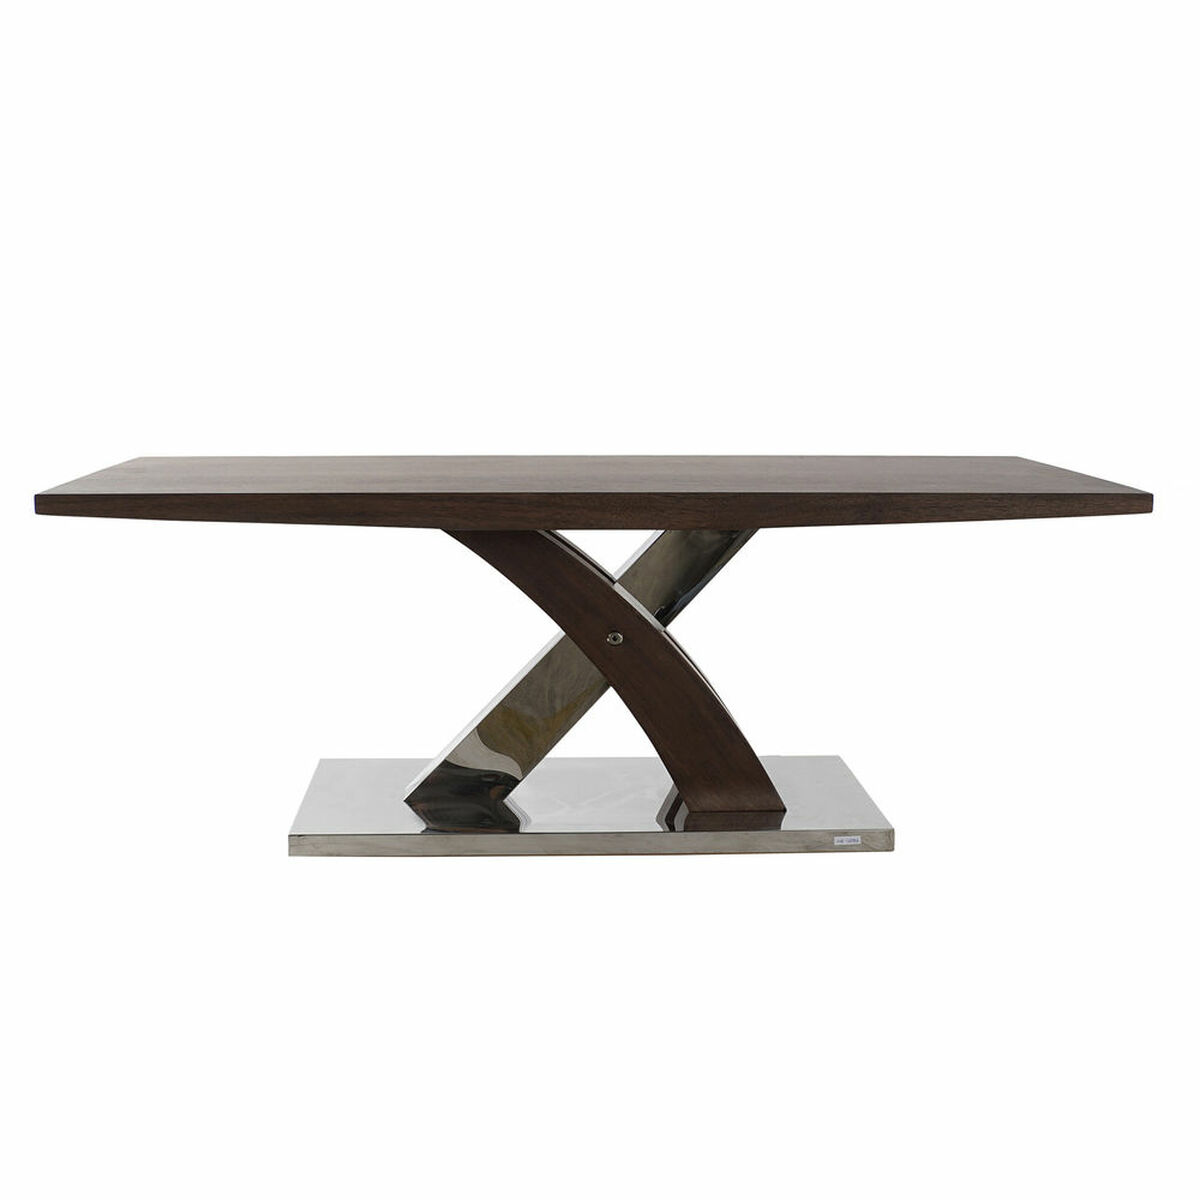 Dining Table DKD Home Decor Wood Steel (120 x 60 x 43.5 cm)